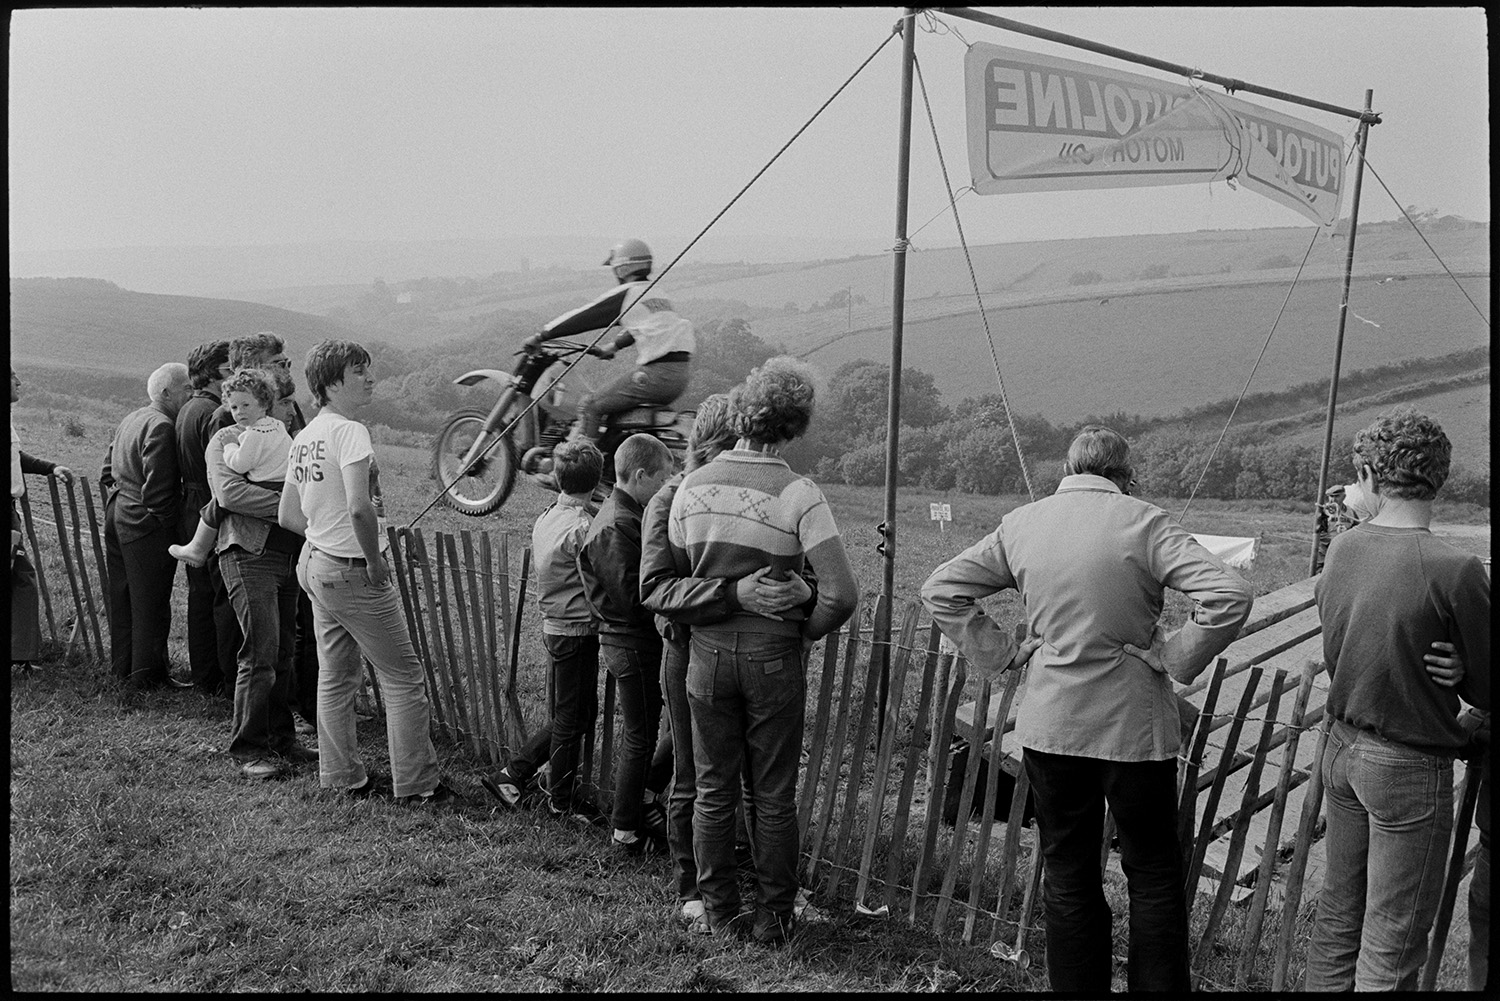 Motorcycle scramble competitors waiting to start racing and jumping at start line. 
[Spectators, including children, watching competitors jumping off a ramp at the start of a motorcycle scramble race in a field at Torrington.]